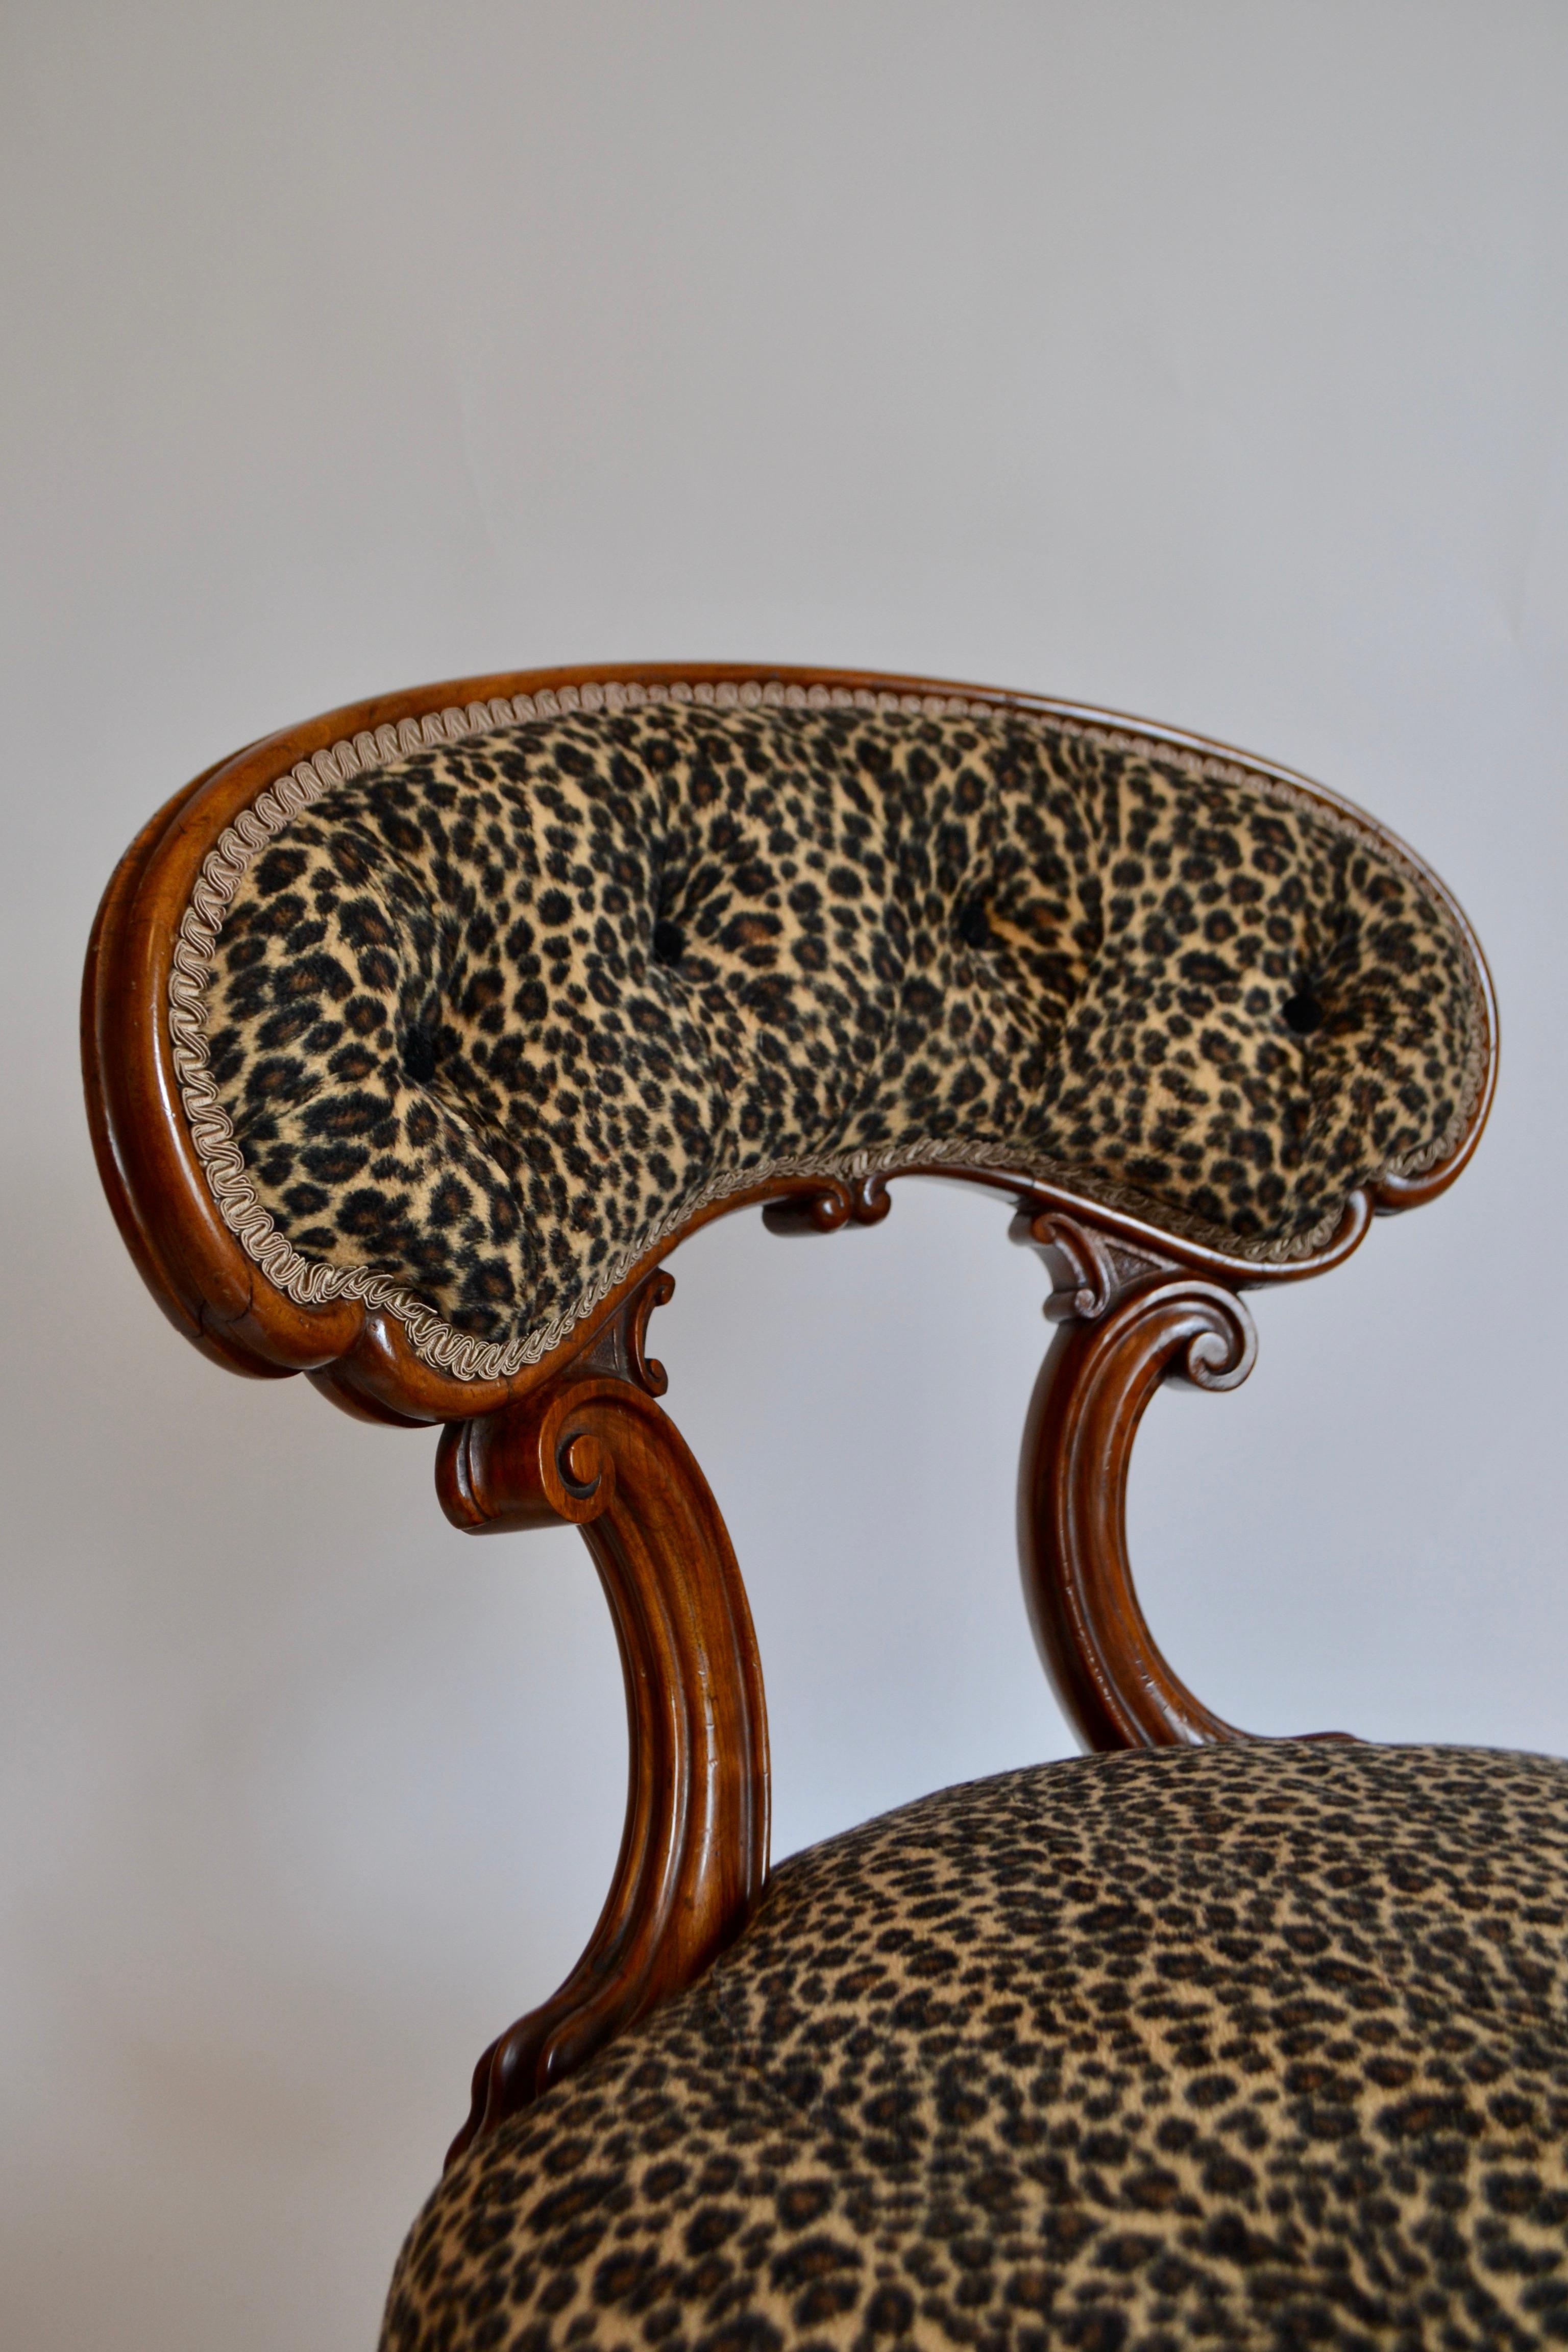 Pair of Victorian Walnut Chairs Upholstered in Faux Leopard Skin, 19th Century For Sale 1